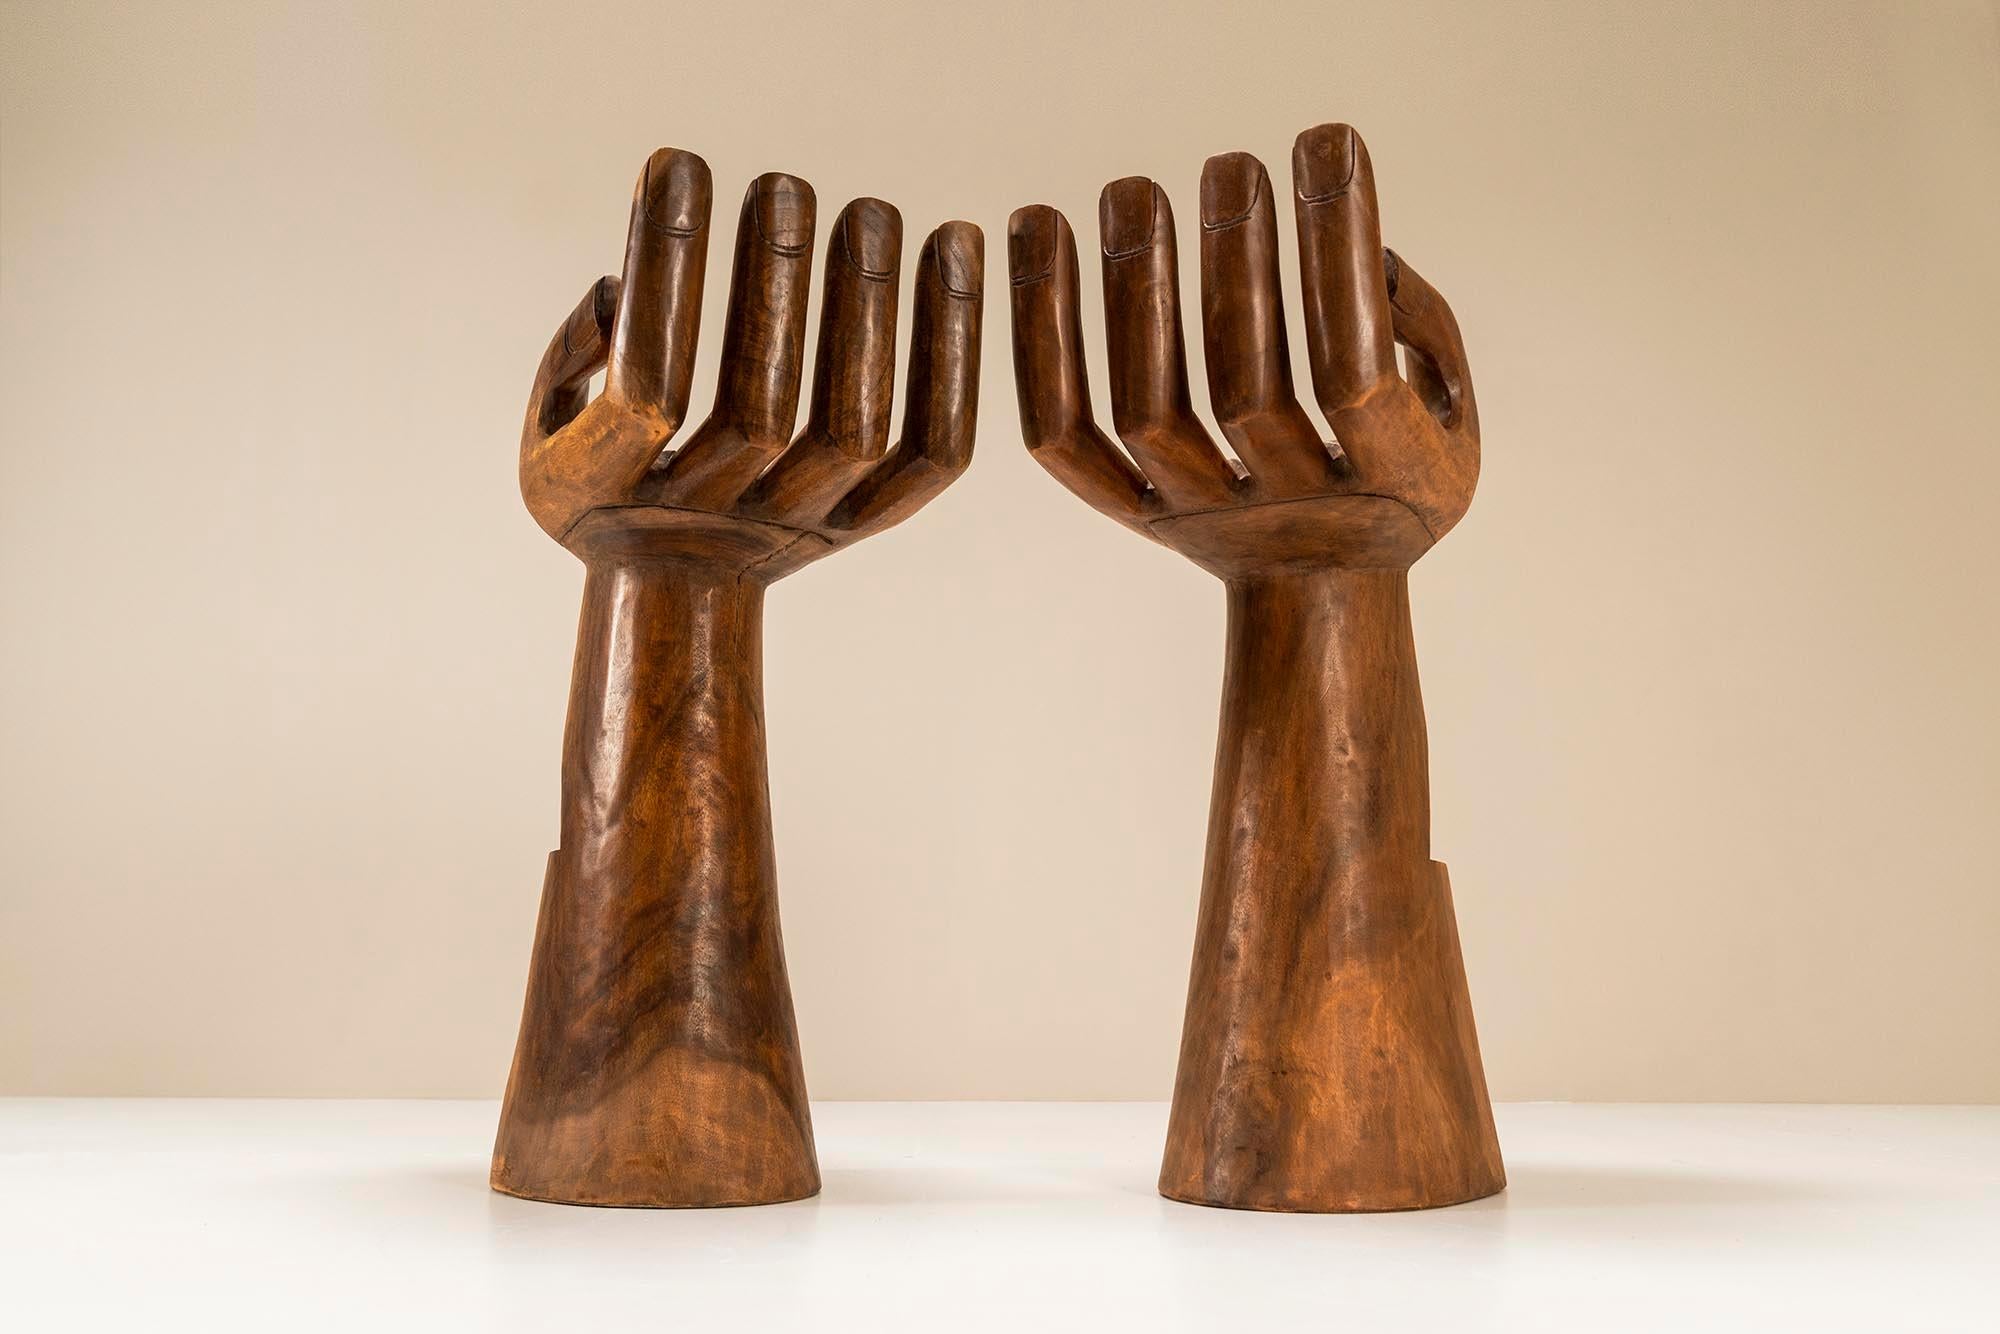 Brutalist Sculptural Artisanal Hand-Shaped Stools in Wood, 1970s